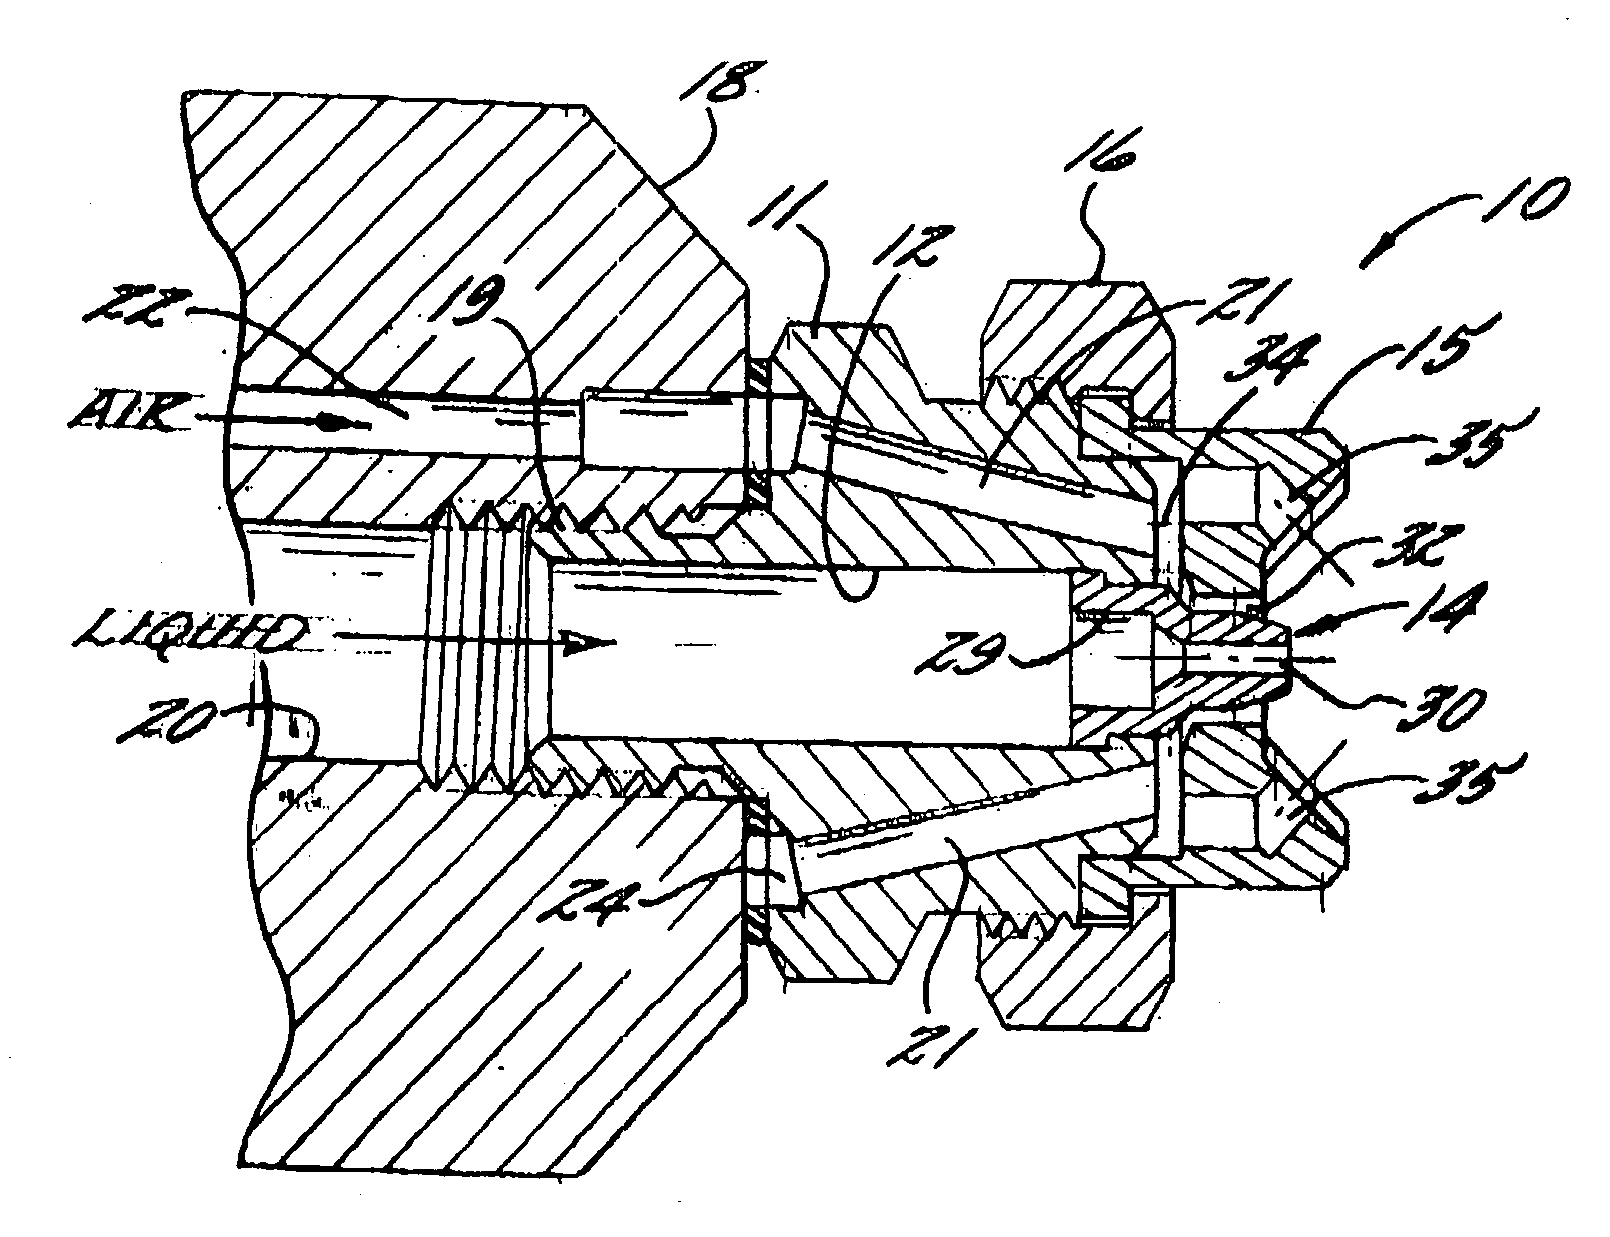 Air assisted spray nozzle assembly for spraying viscous liquids